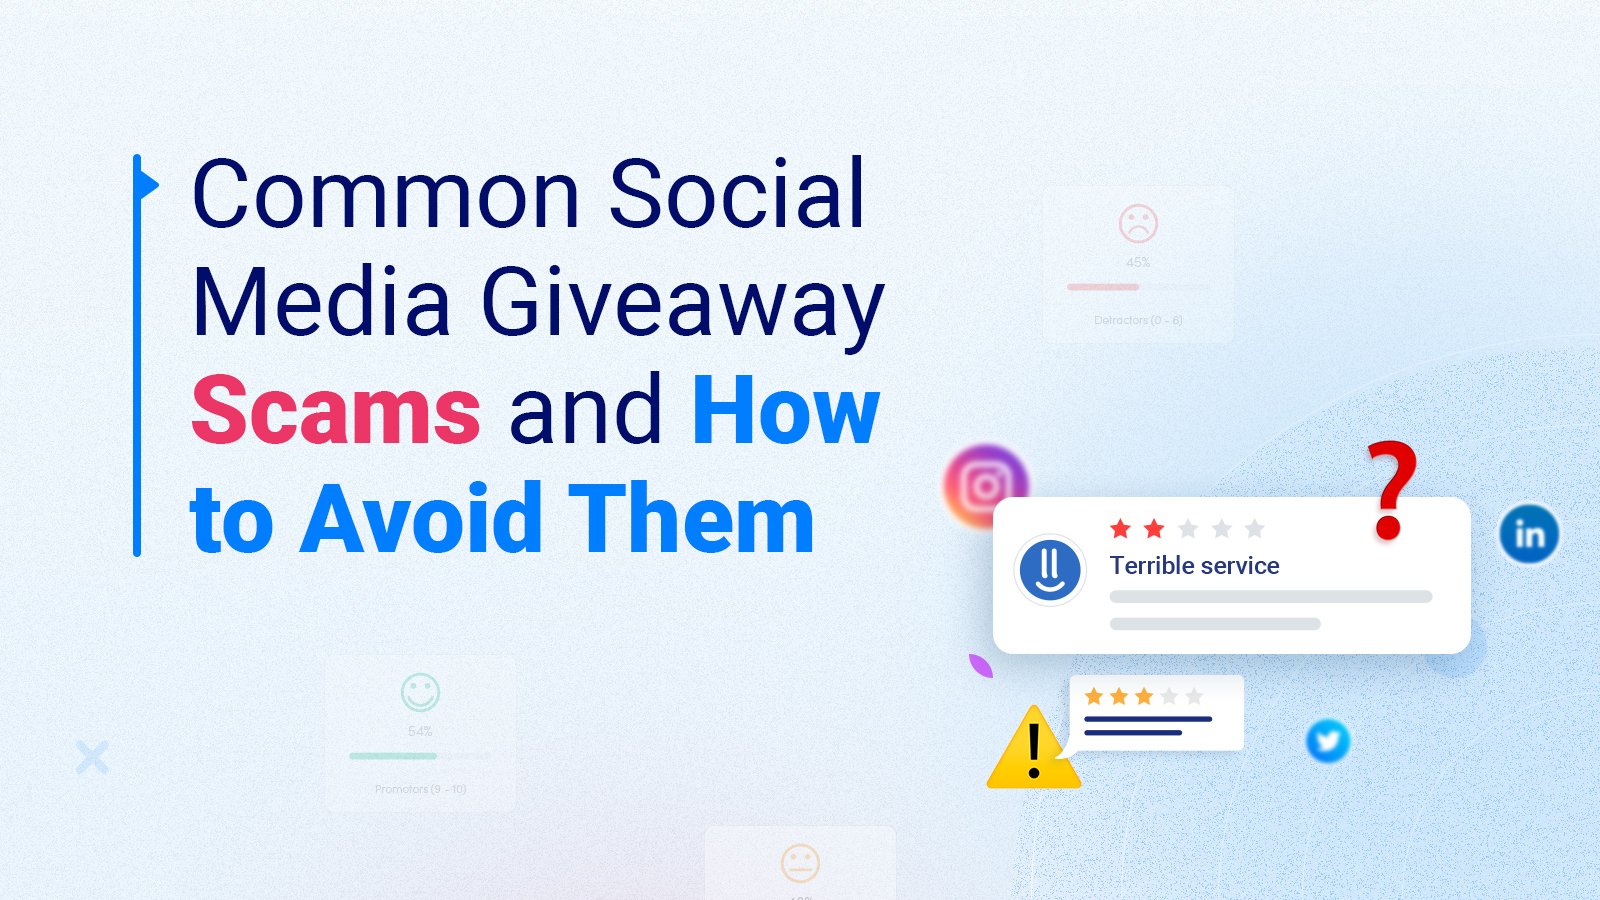 Common social media scams and how to avoid them